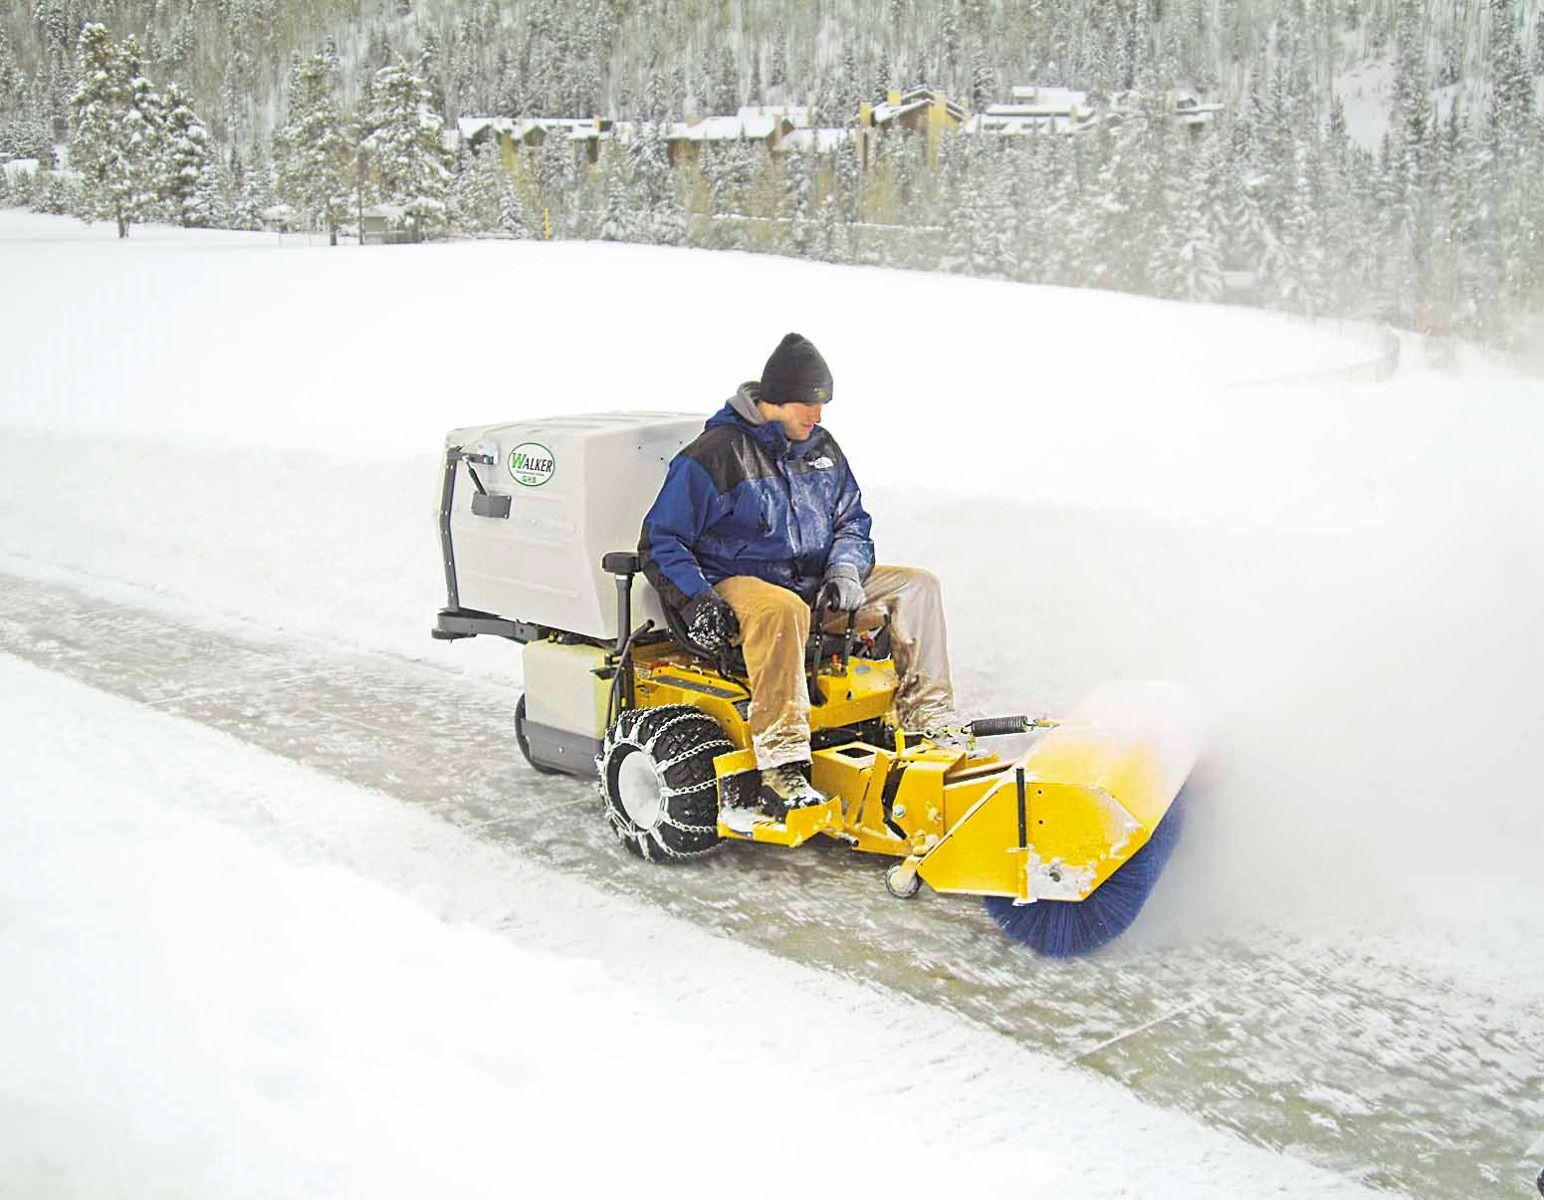 Ideal for sweeping light snow on hard surfaces